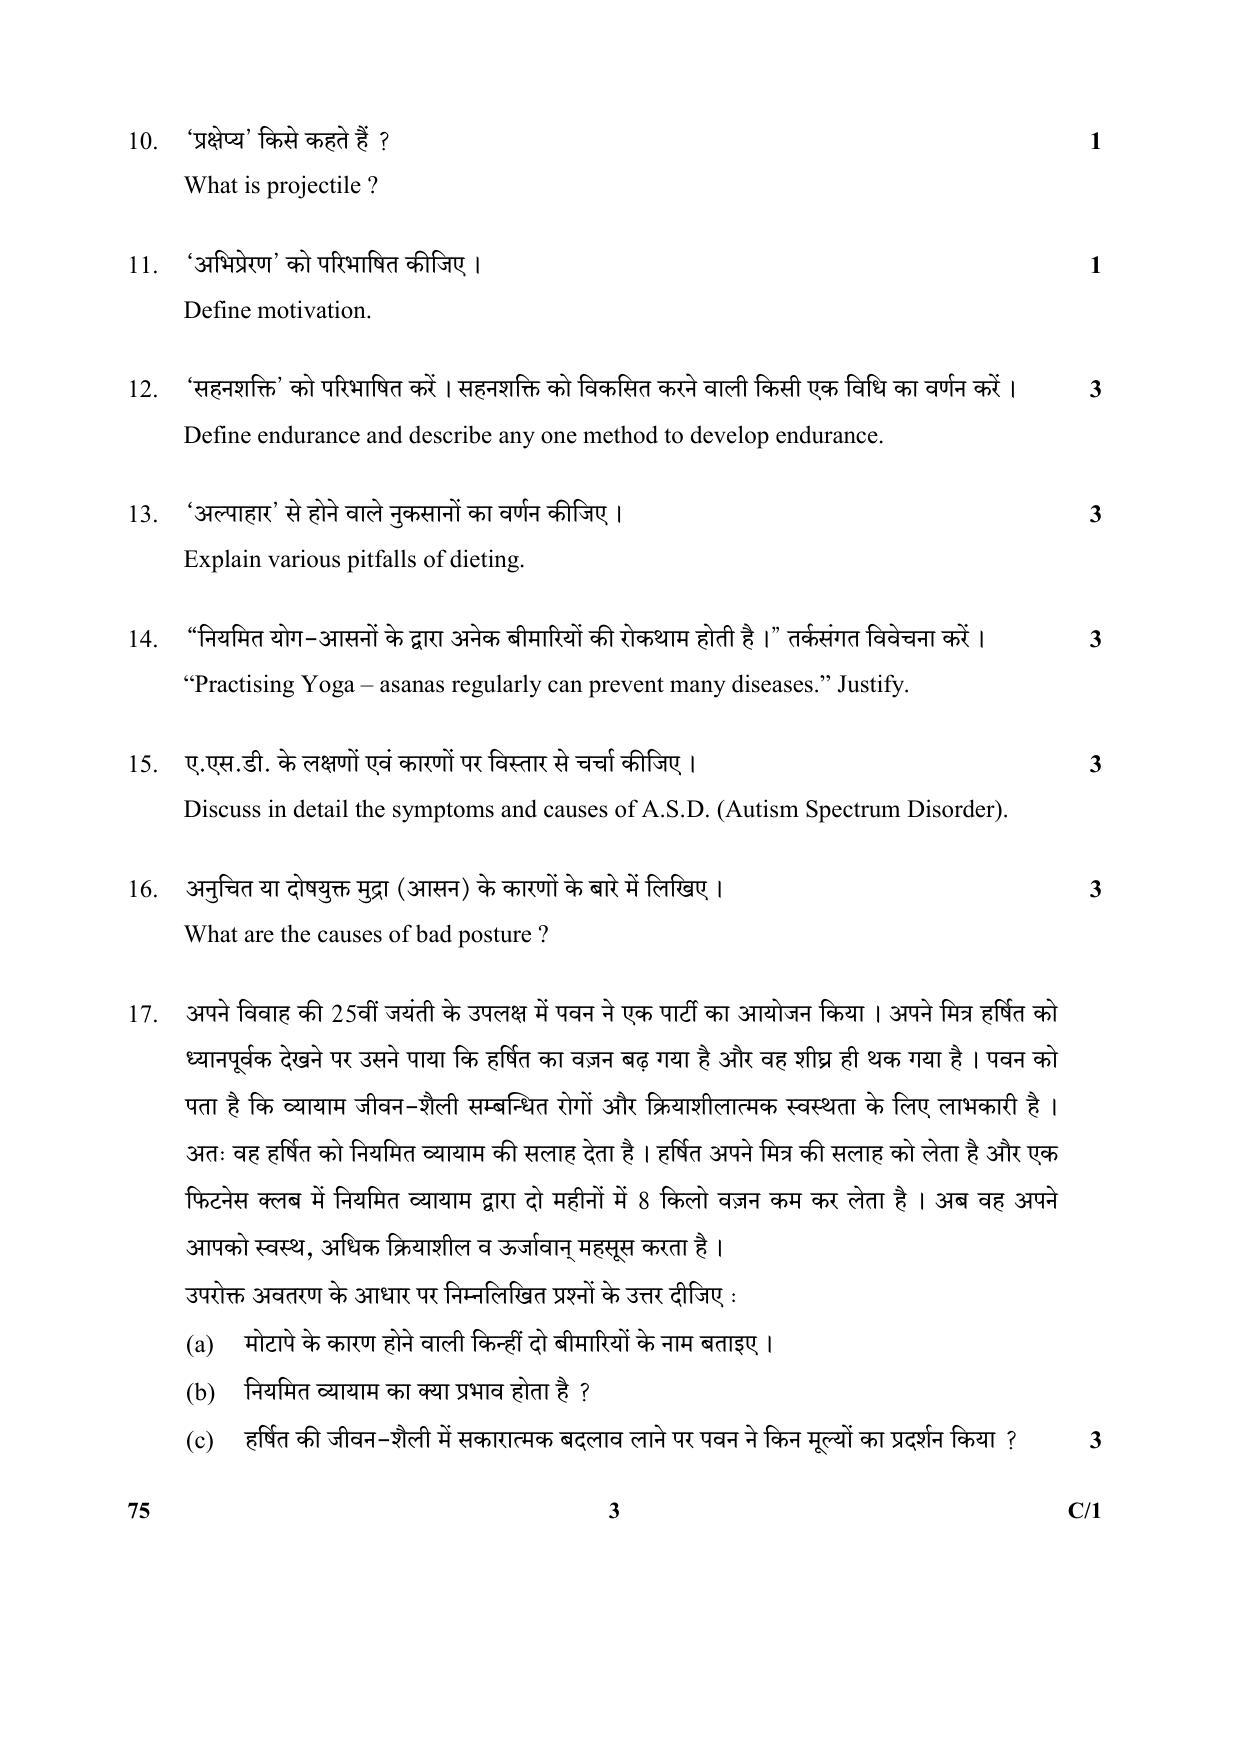 CBSE Class 12 75 (Physical Education) 2018 Compartment Question Paper - Page 3